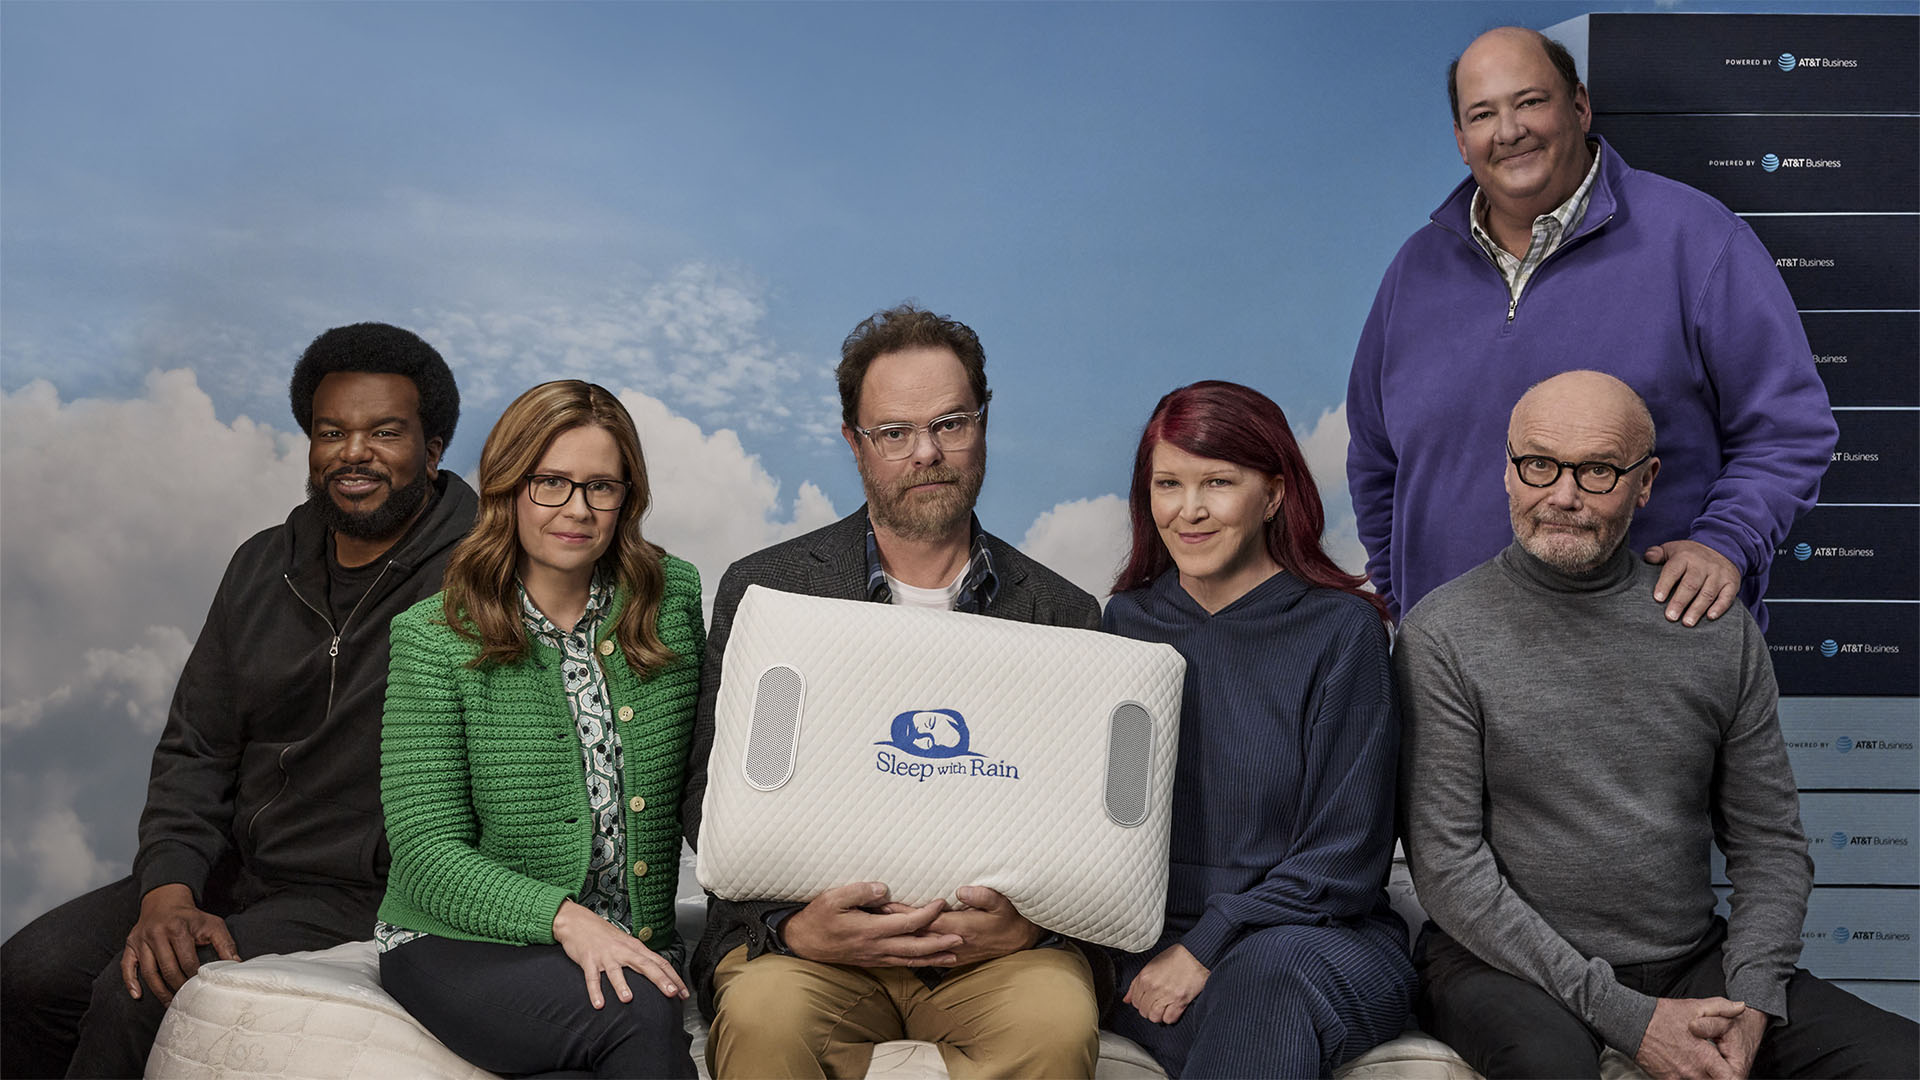 The cast of The Office reunites for an AT&T Business advertisement